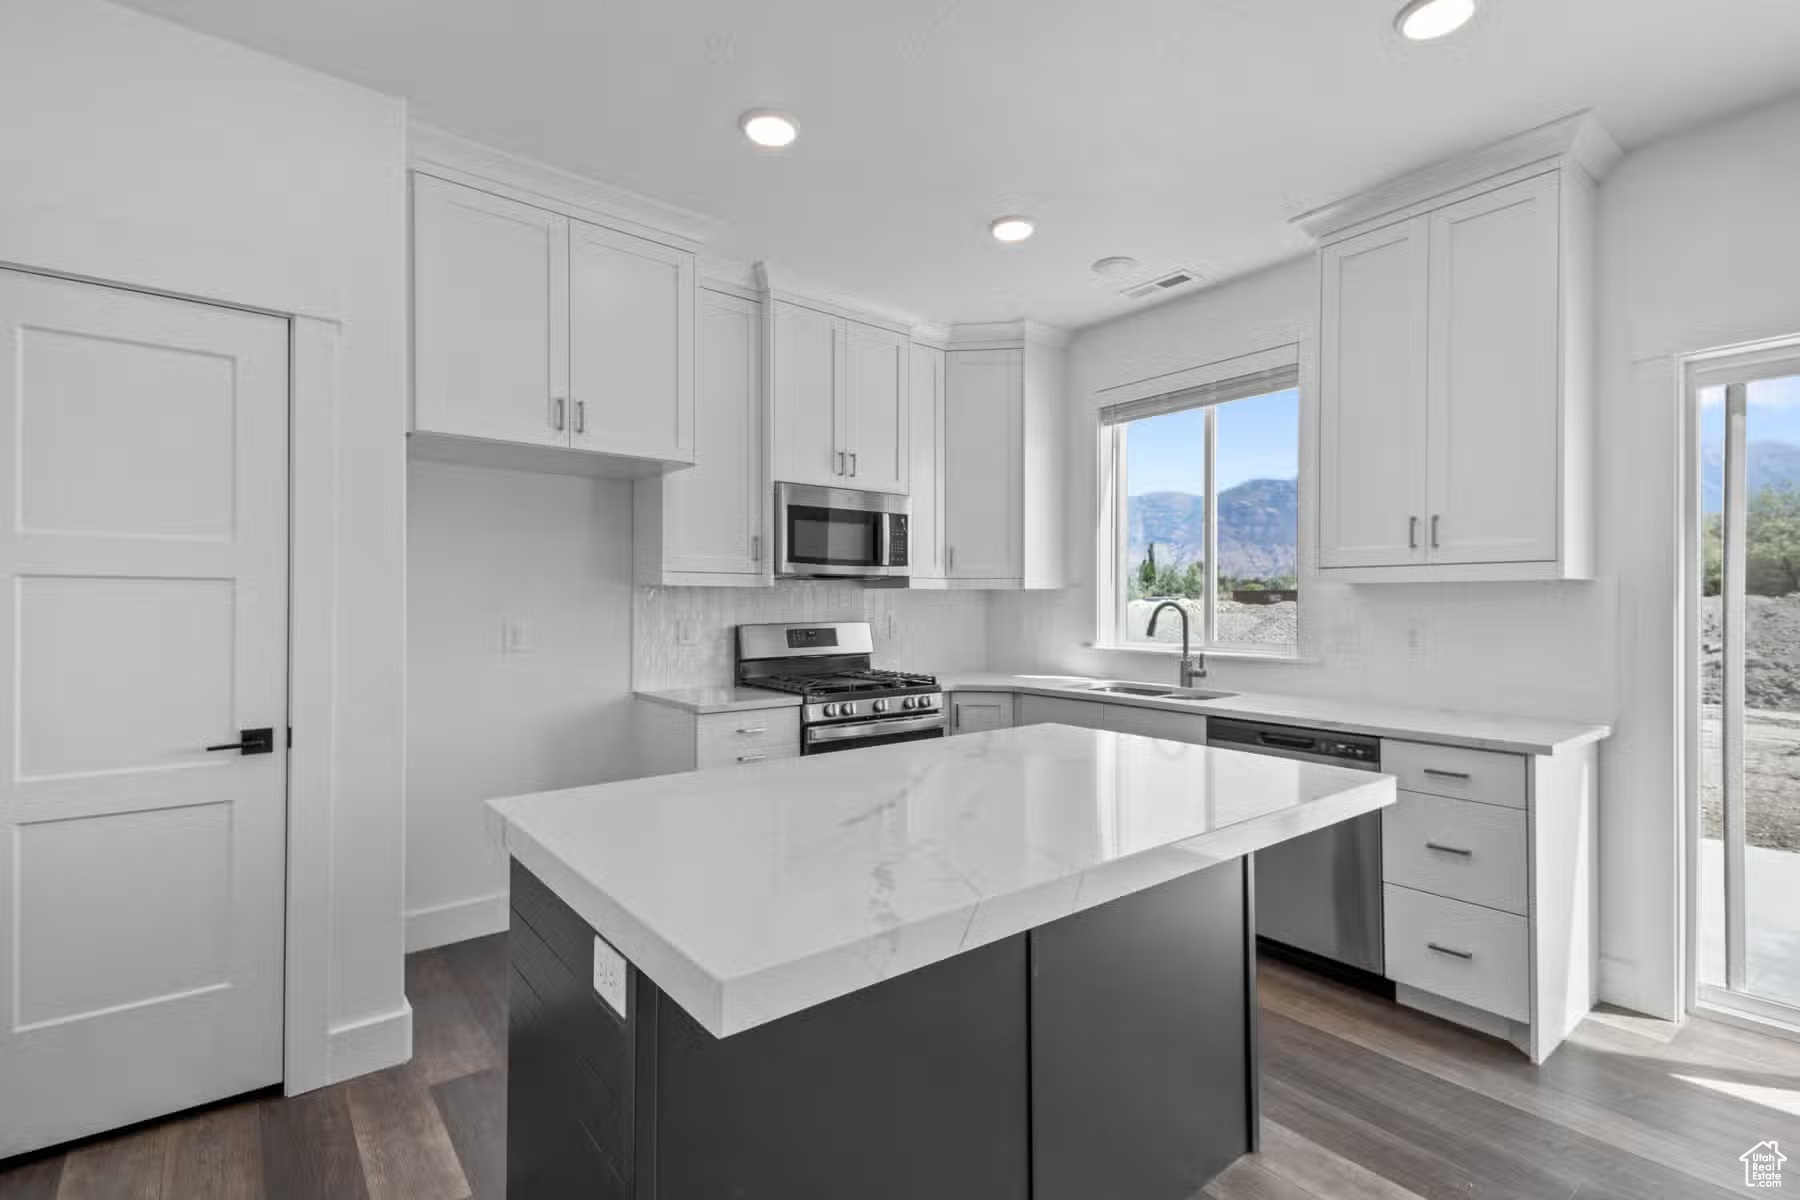 Kitchen featuring a wealth of natural light, stainless steel appliances, white cabinetry, and hardwood / wood-style floors